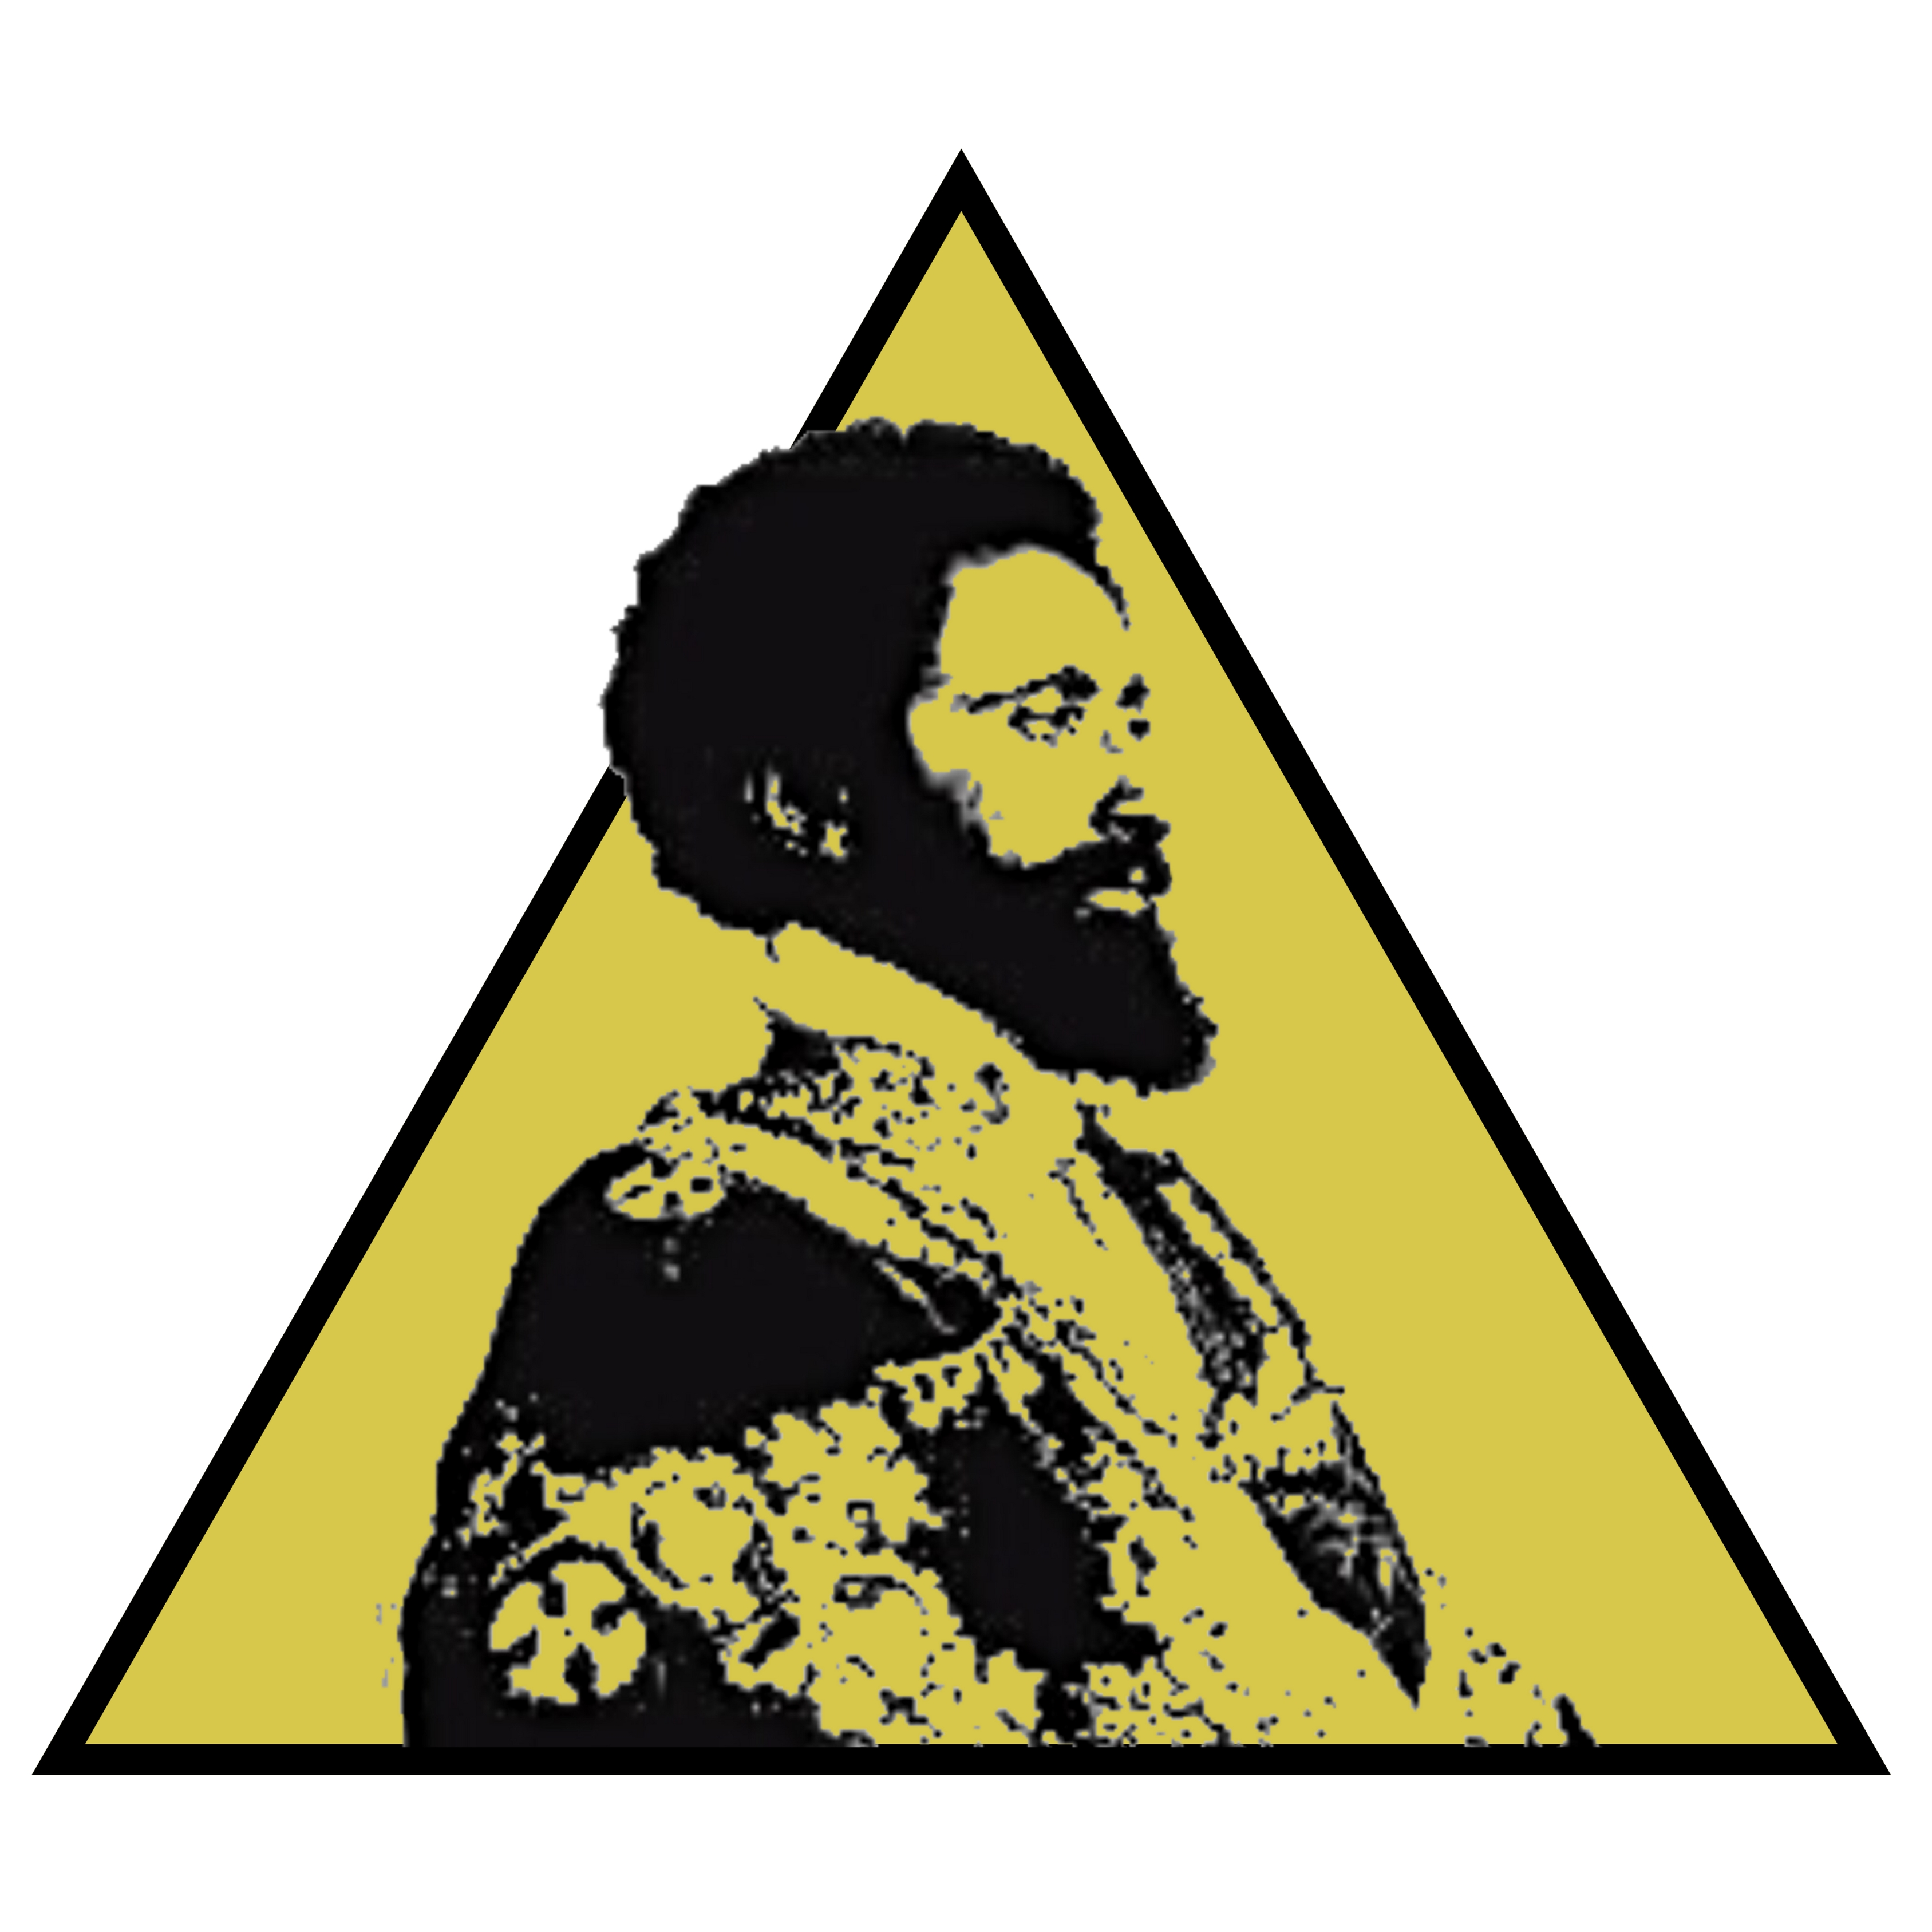 His Imperial Majesty Haile Selassie in a golden pyramid